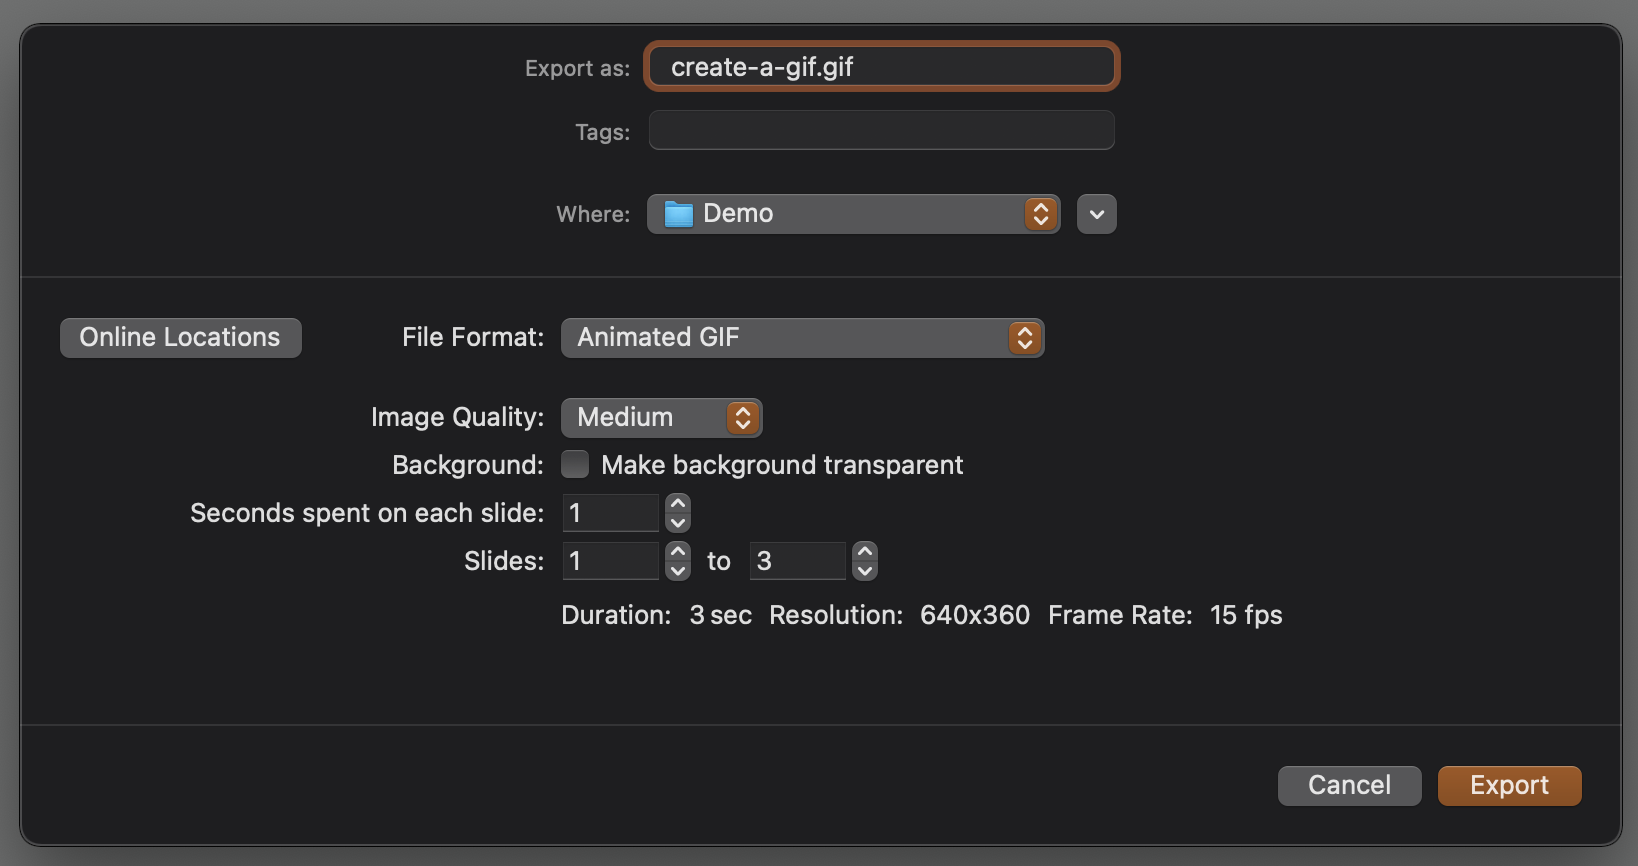 image shows the export options for a gif, they are explained below